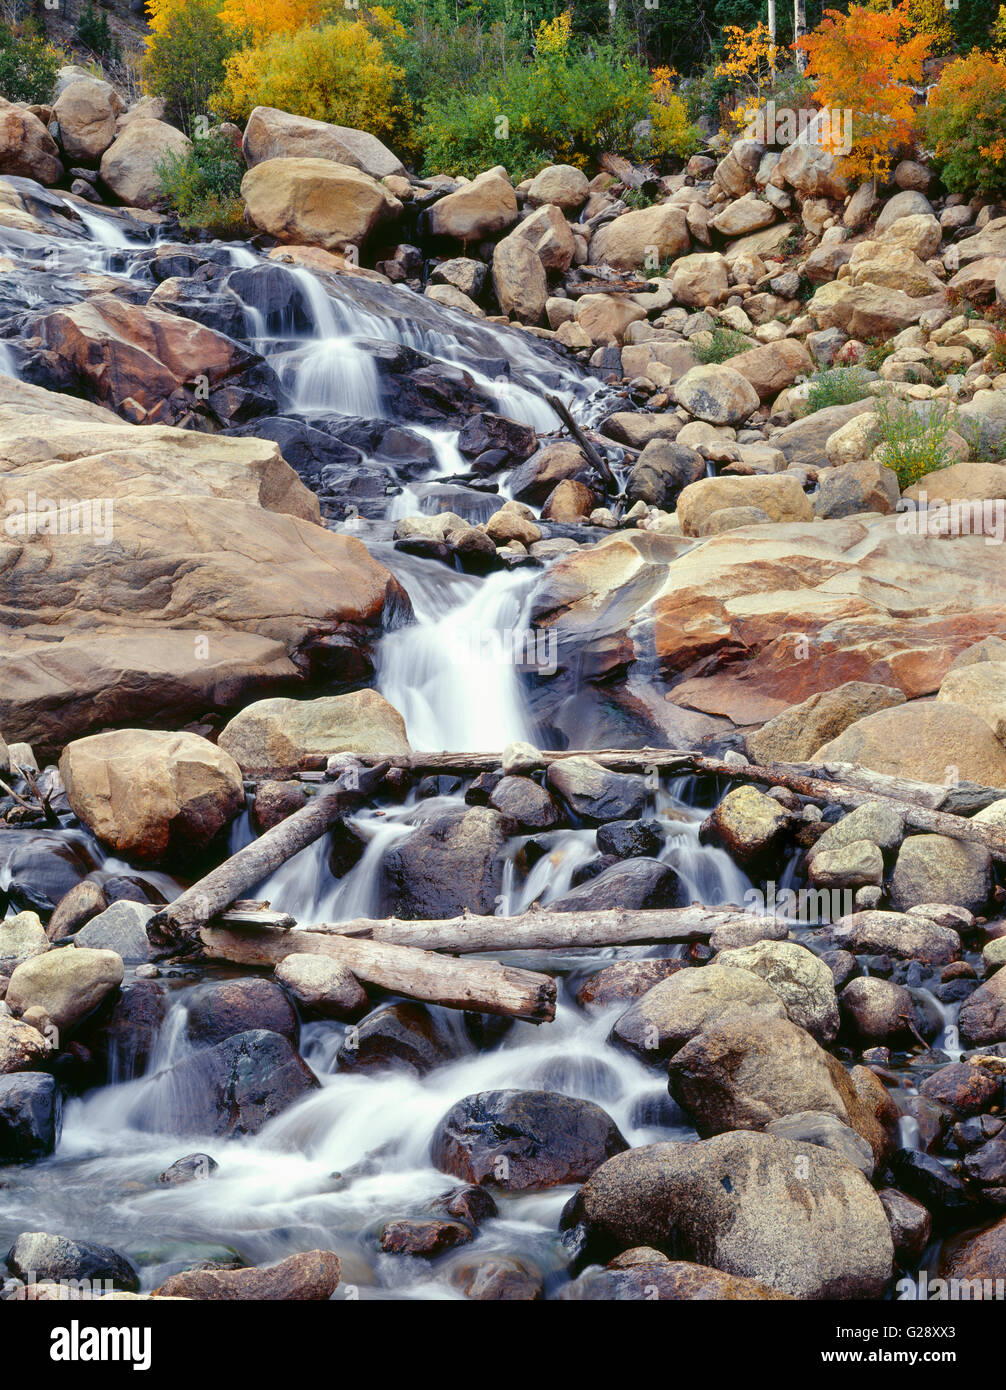 USA, Colorado, Rocky Mountain National Park, Waterfall on Roaring River with fall-colored quaking aspen. Stock Photo